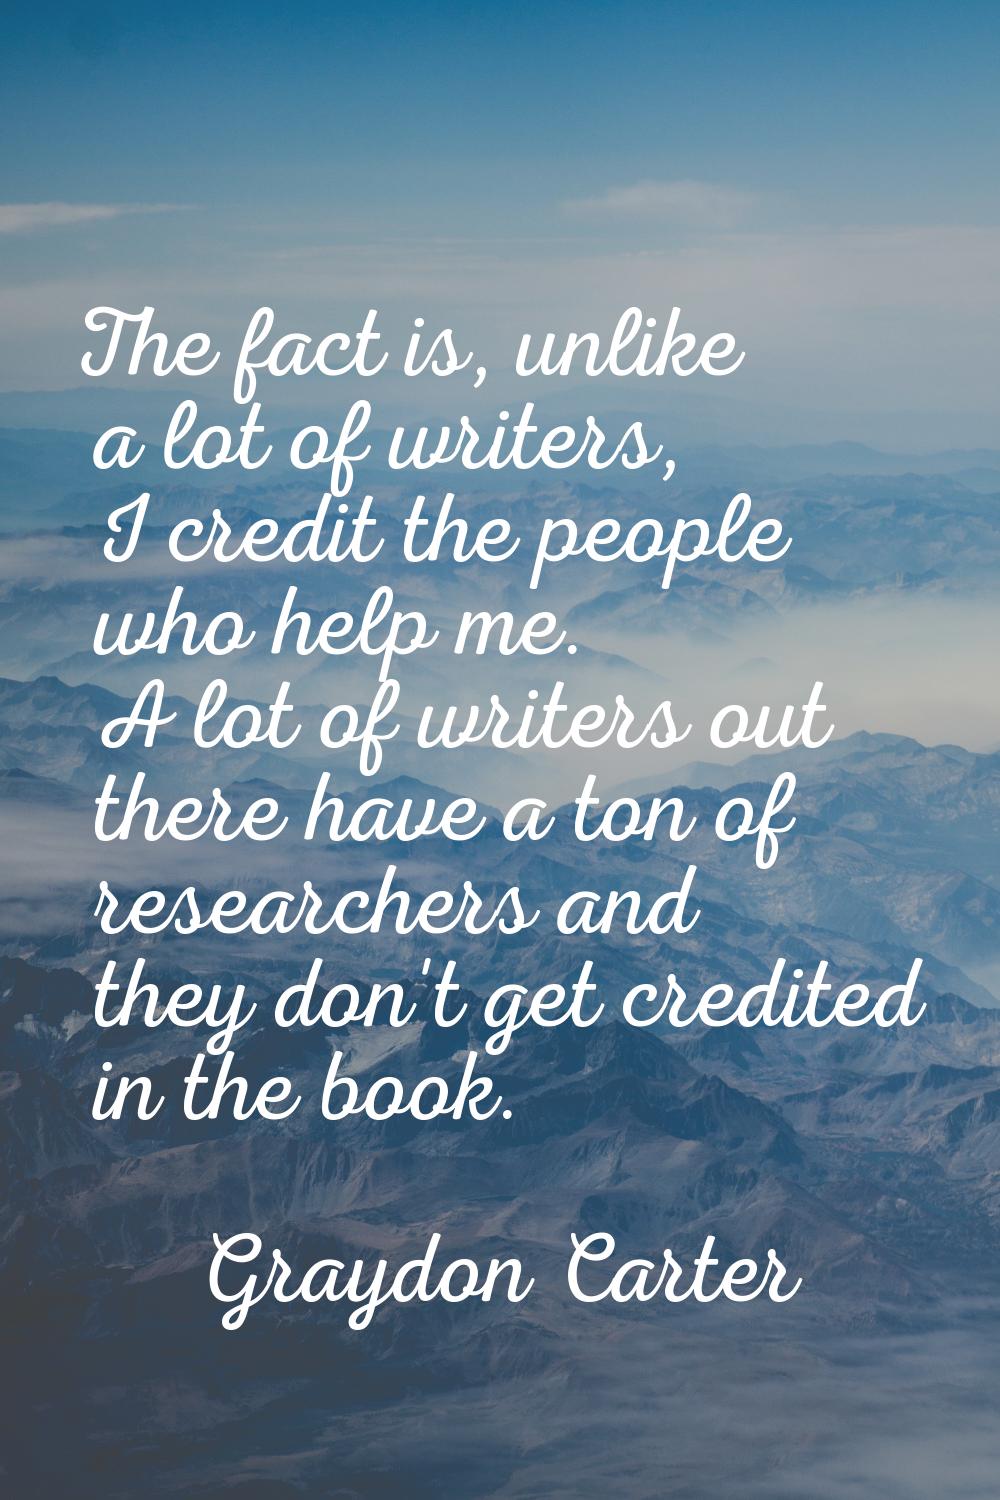 The fact is, unlike a lot of writers, I credit the people who help me. A lot of writers out there h